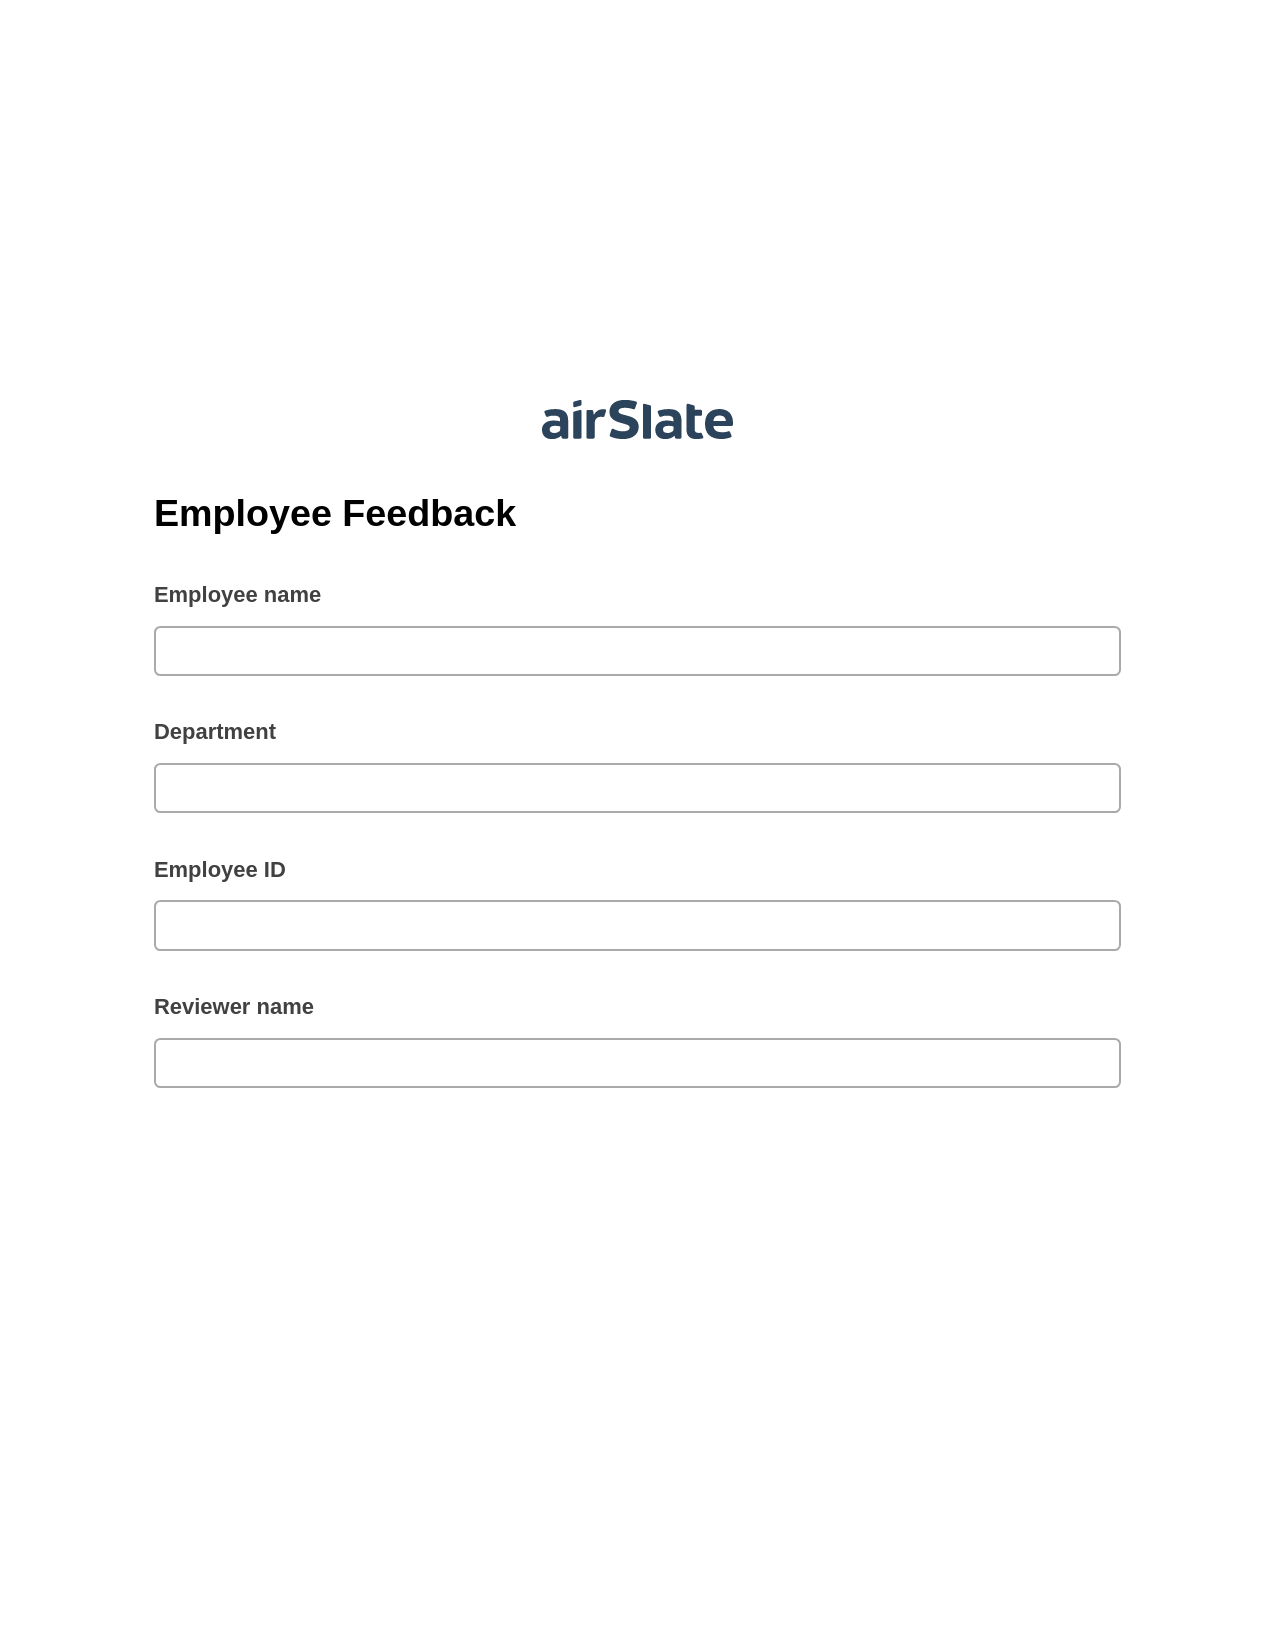 Employee Feedback Pre-fill from NetSuite Records Bot, Update NetSuite Records Bot, OneDrive Bot